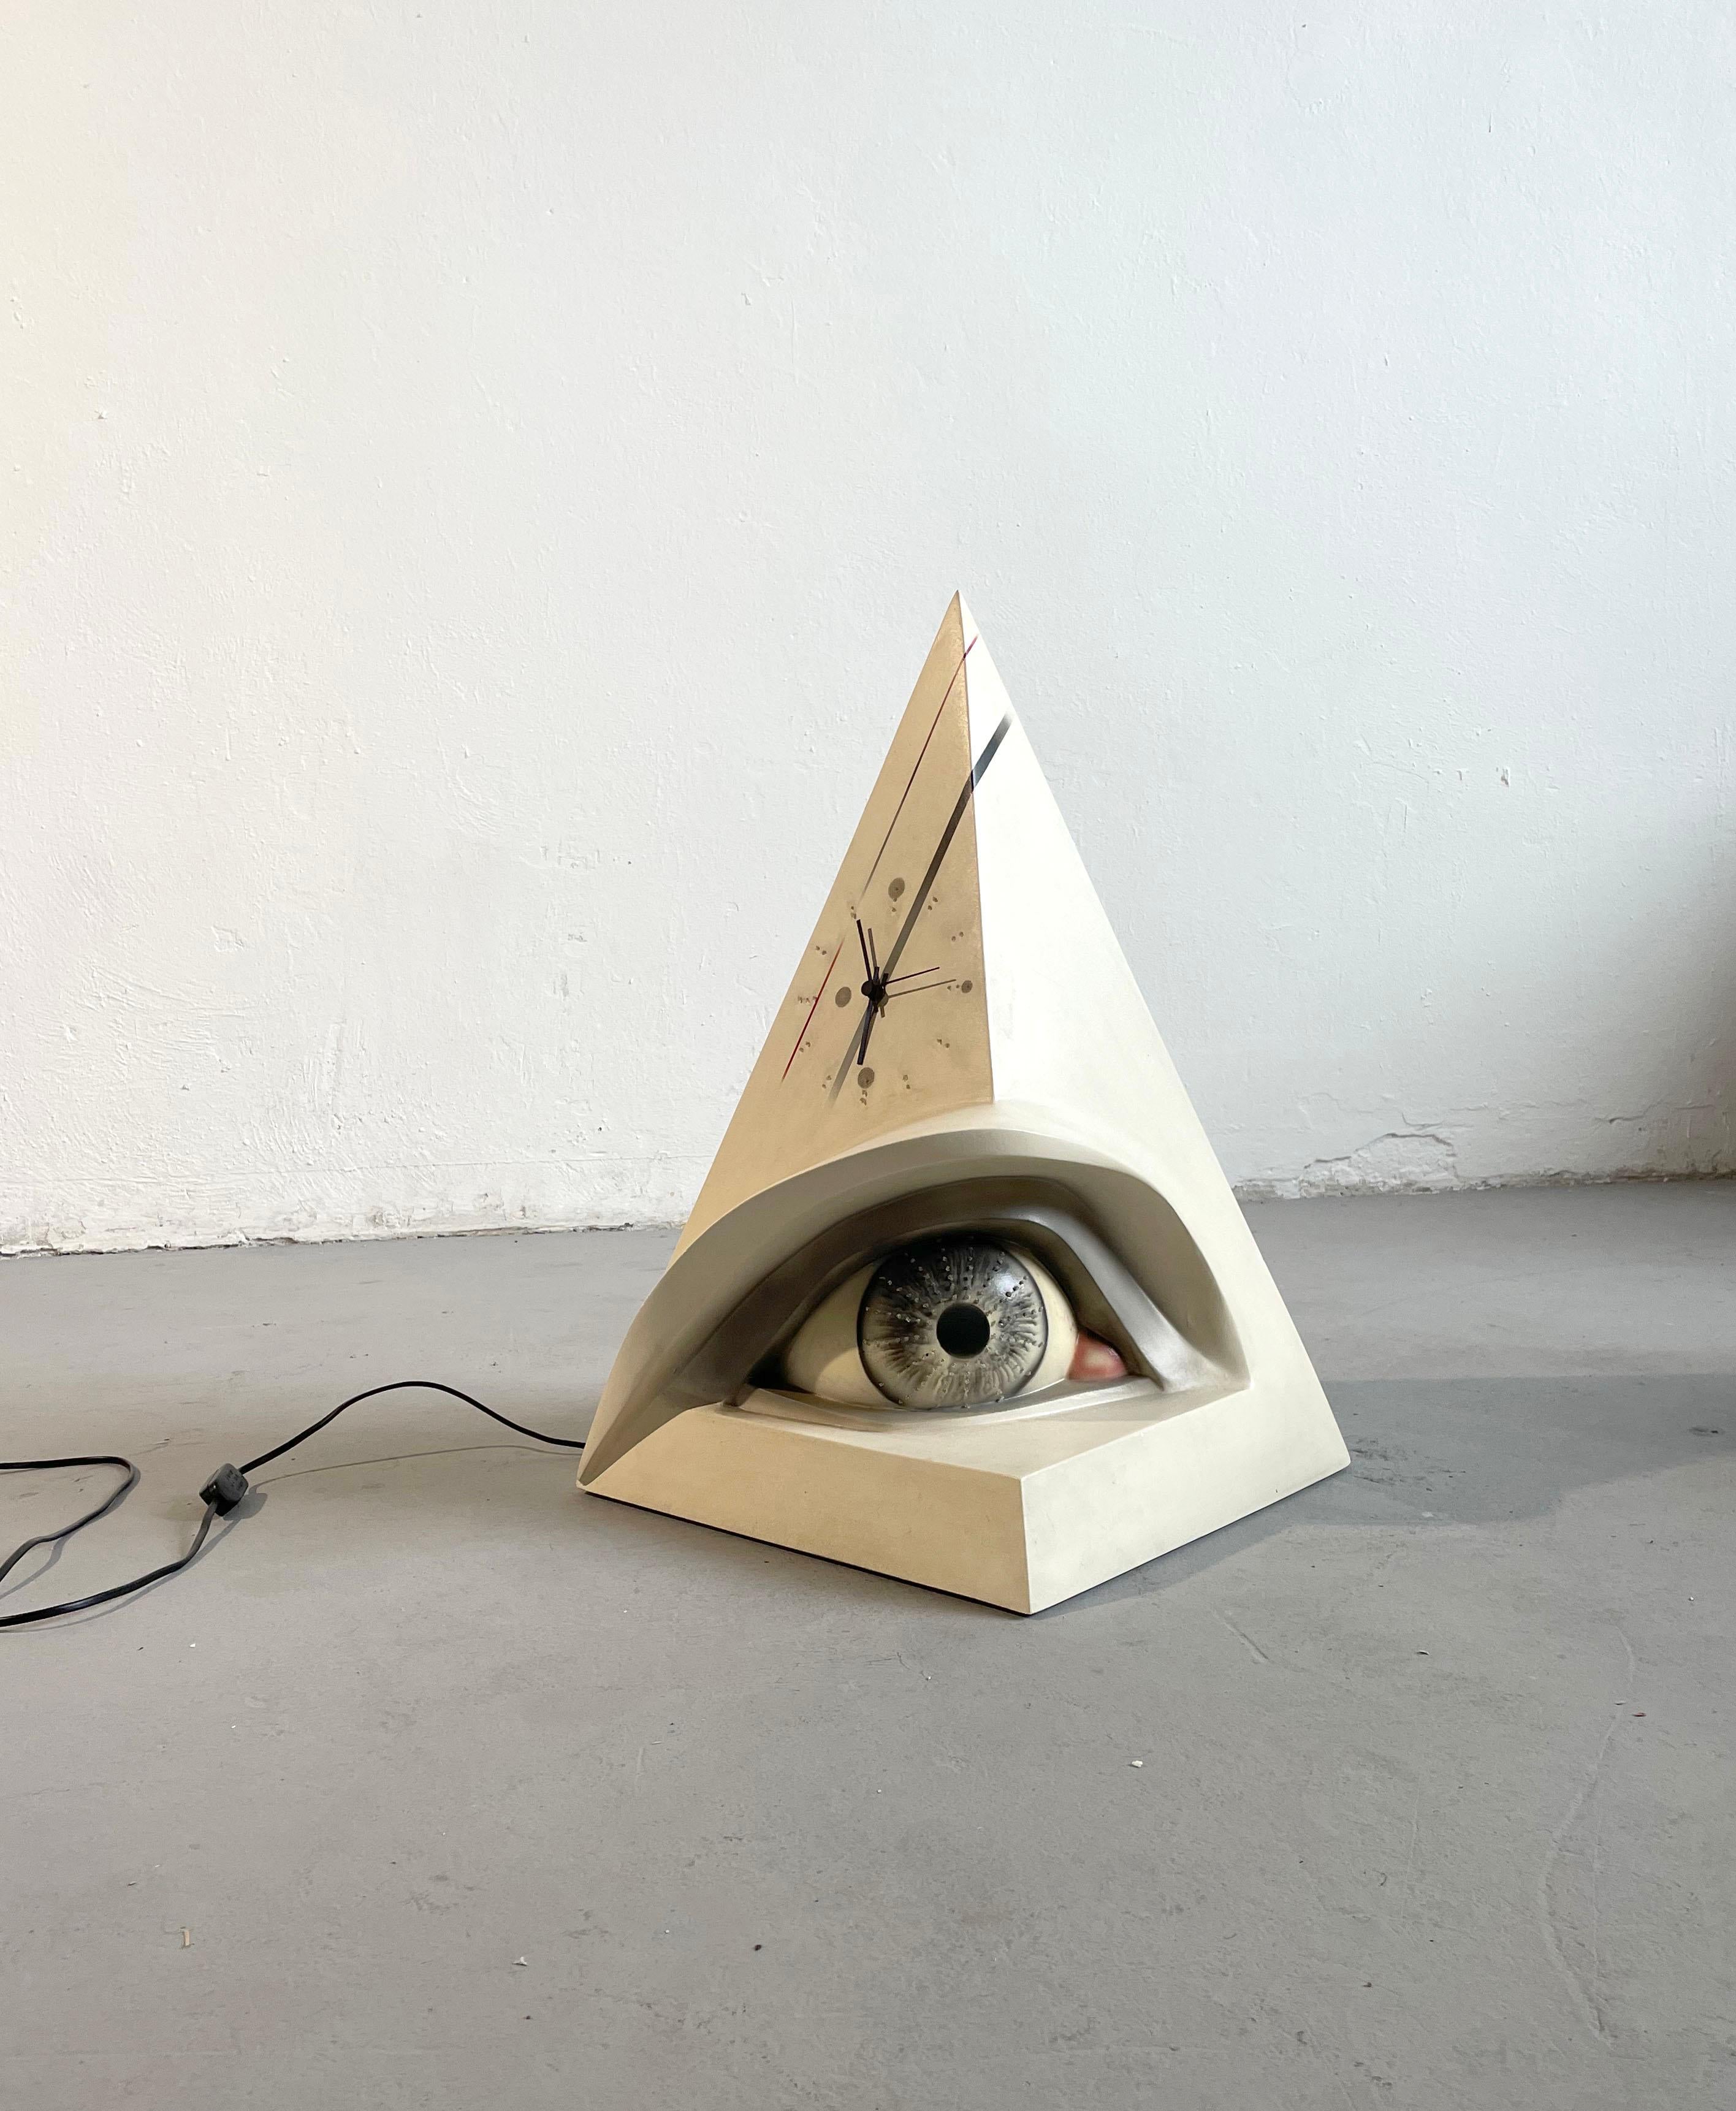 Very rare surrealist pyramid-shaped table clock and decorative sculptural piece designed and manufactured by Atelier Sommarti, Bruxelles Belgium 1980s - 1990s

Made of fiberglass and polyester, signed

The clock has a battery-operated mechanism,